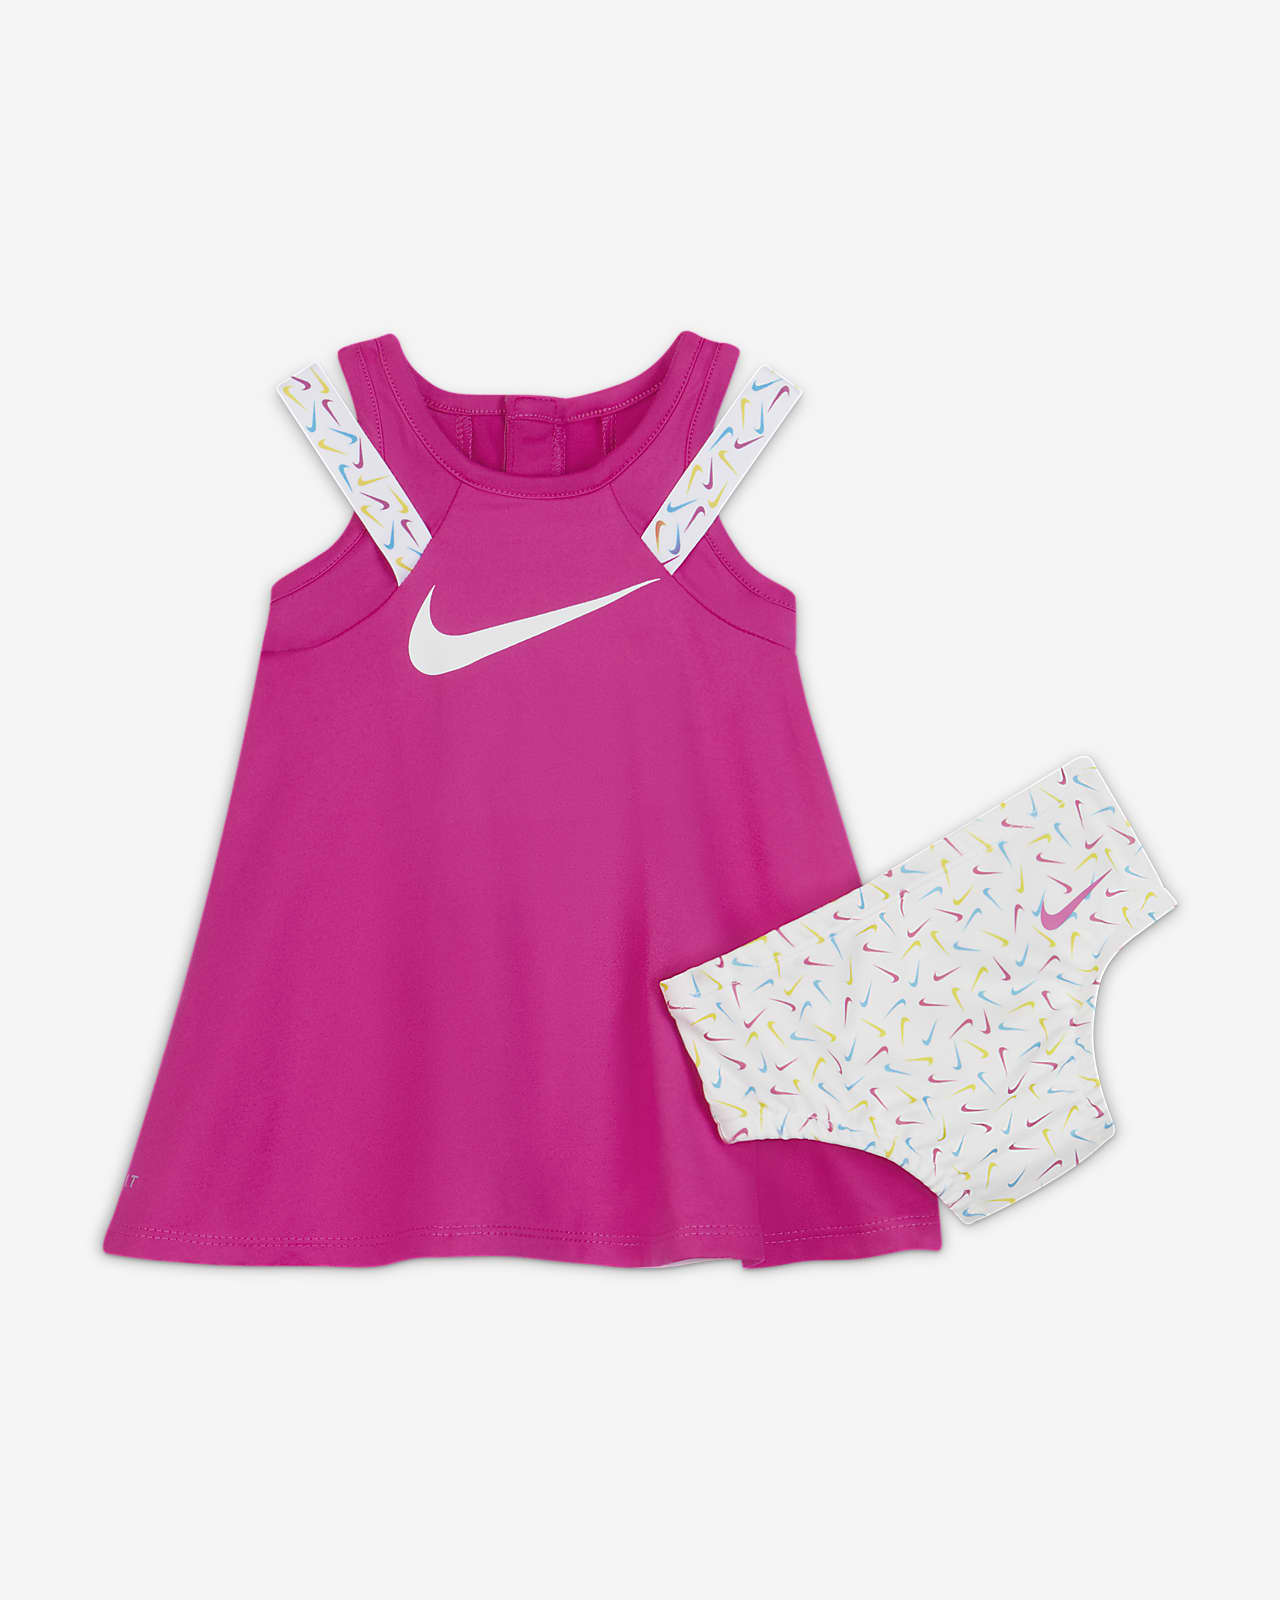 dri fit baby clothes